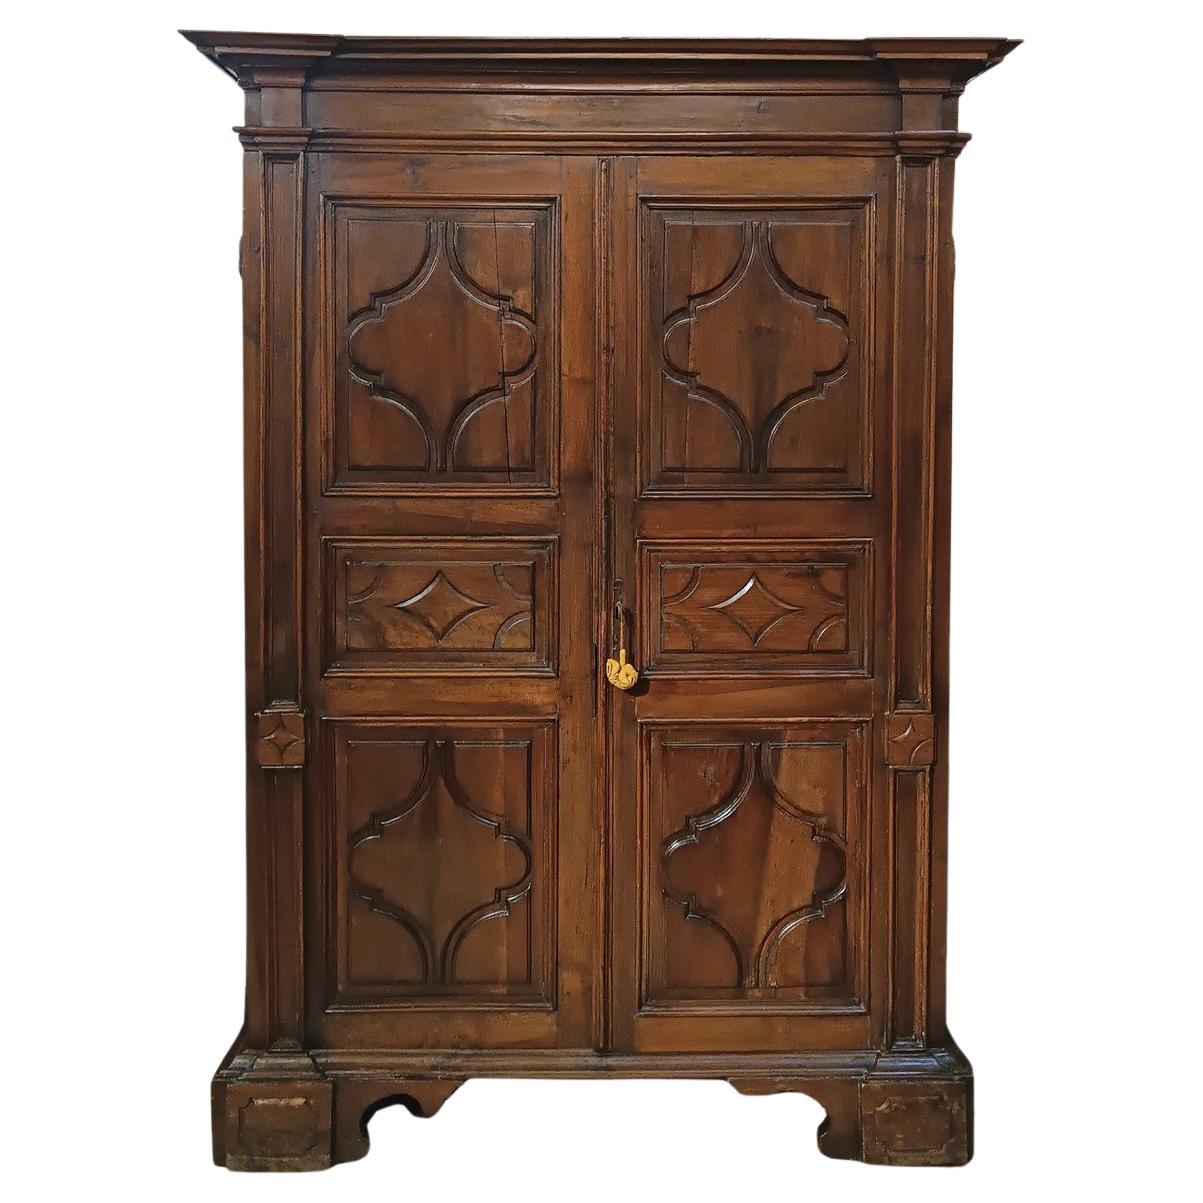 END OF THE 17th CENTURY LOUIS XIV WARDROBE IN SOLID WALNUT